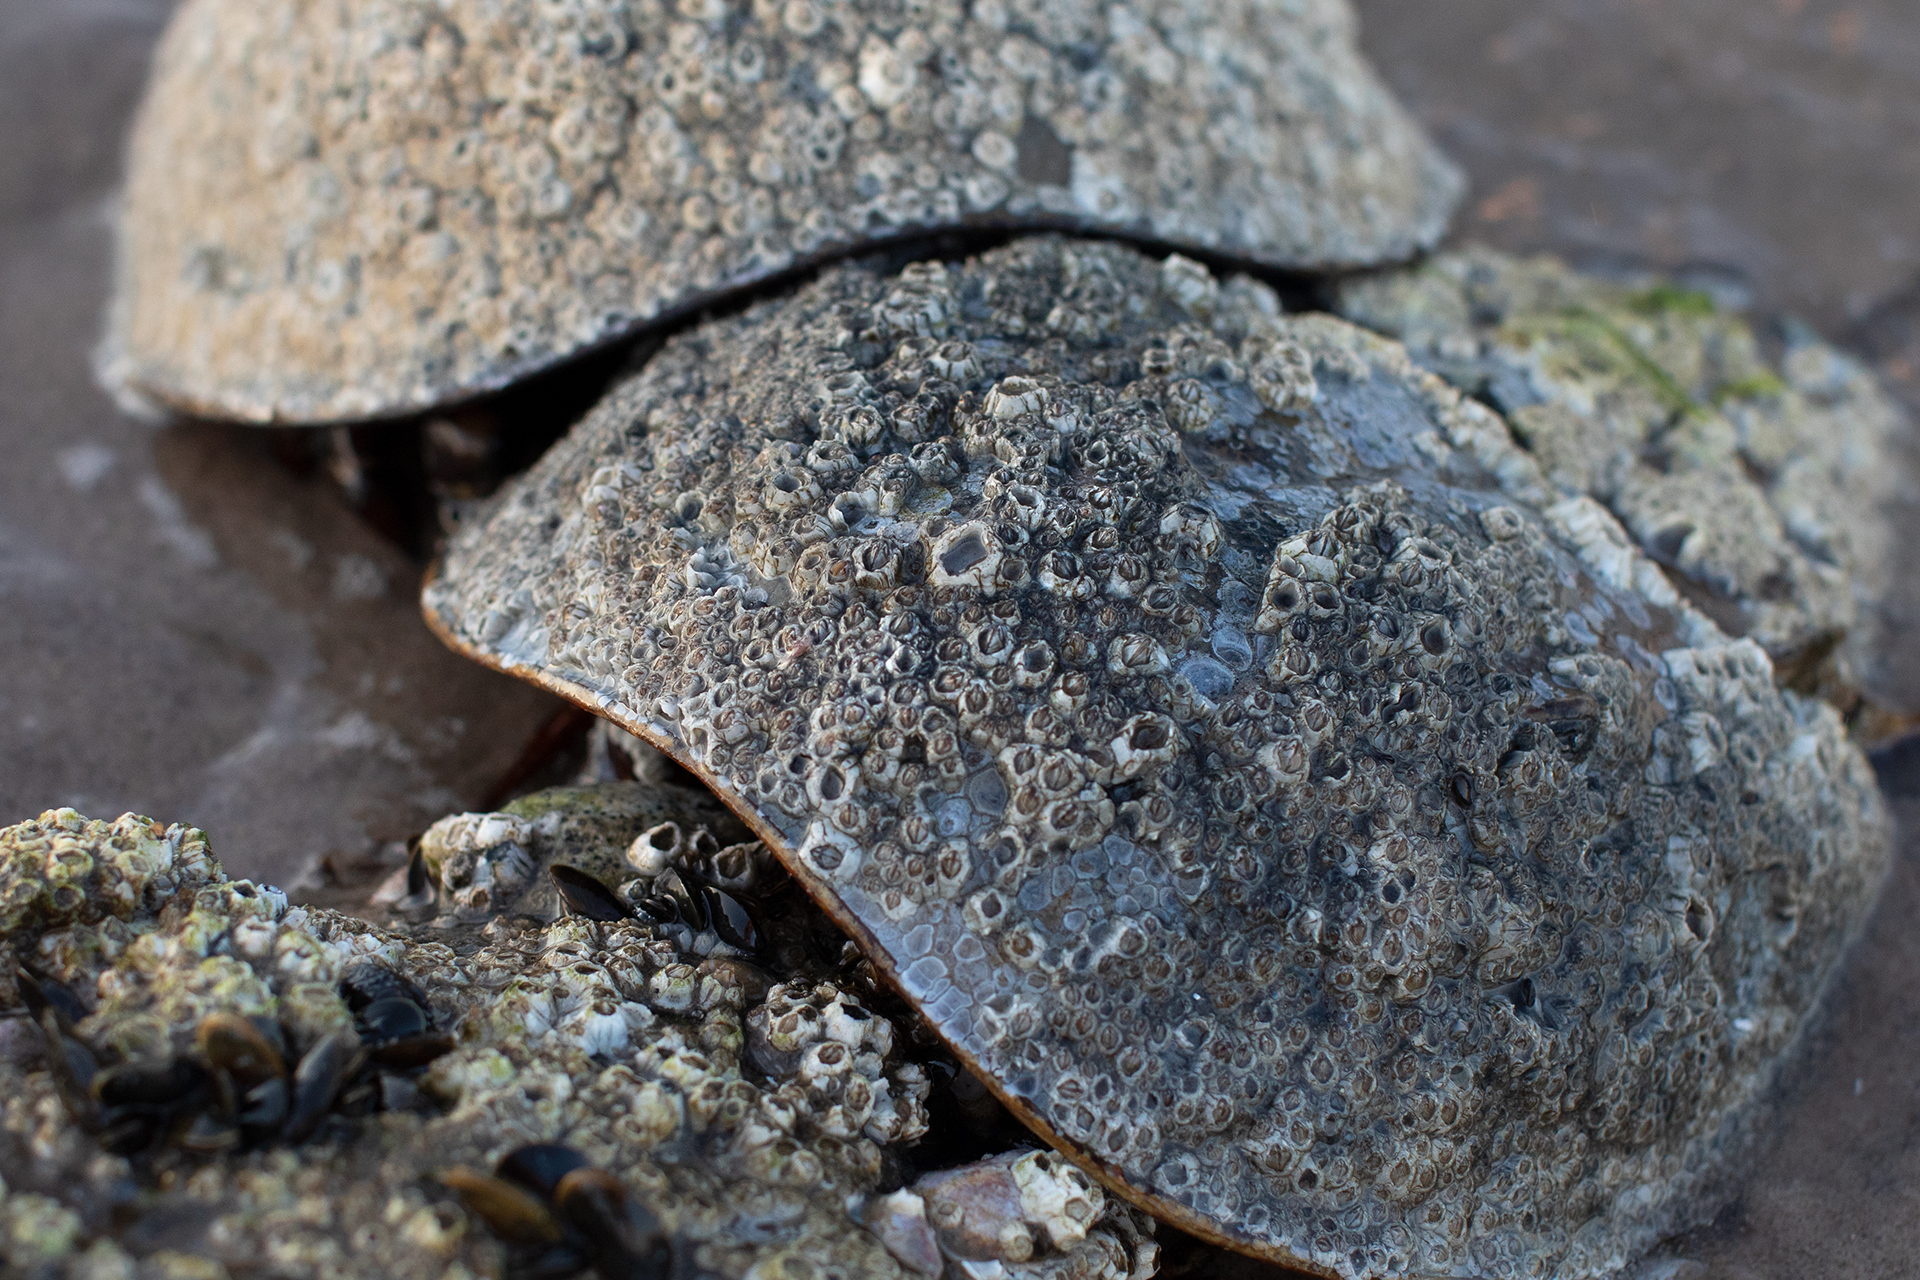 A close up view of horseshoe crabs that reveals they're covered in barnacles and other small creatures.